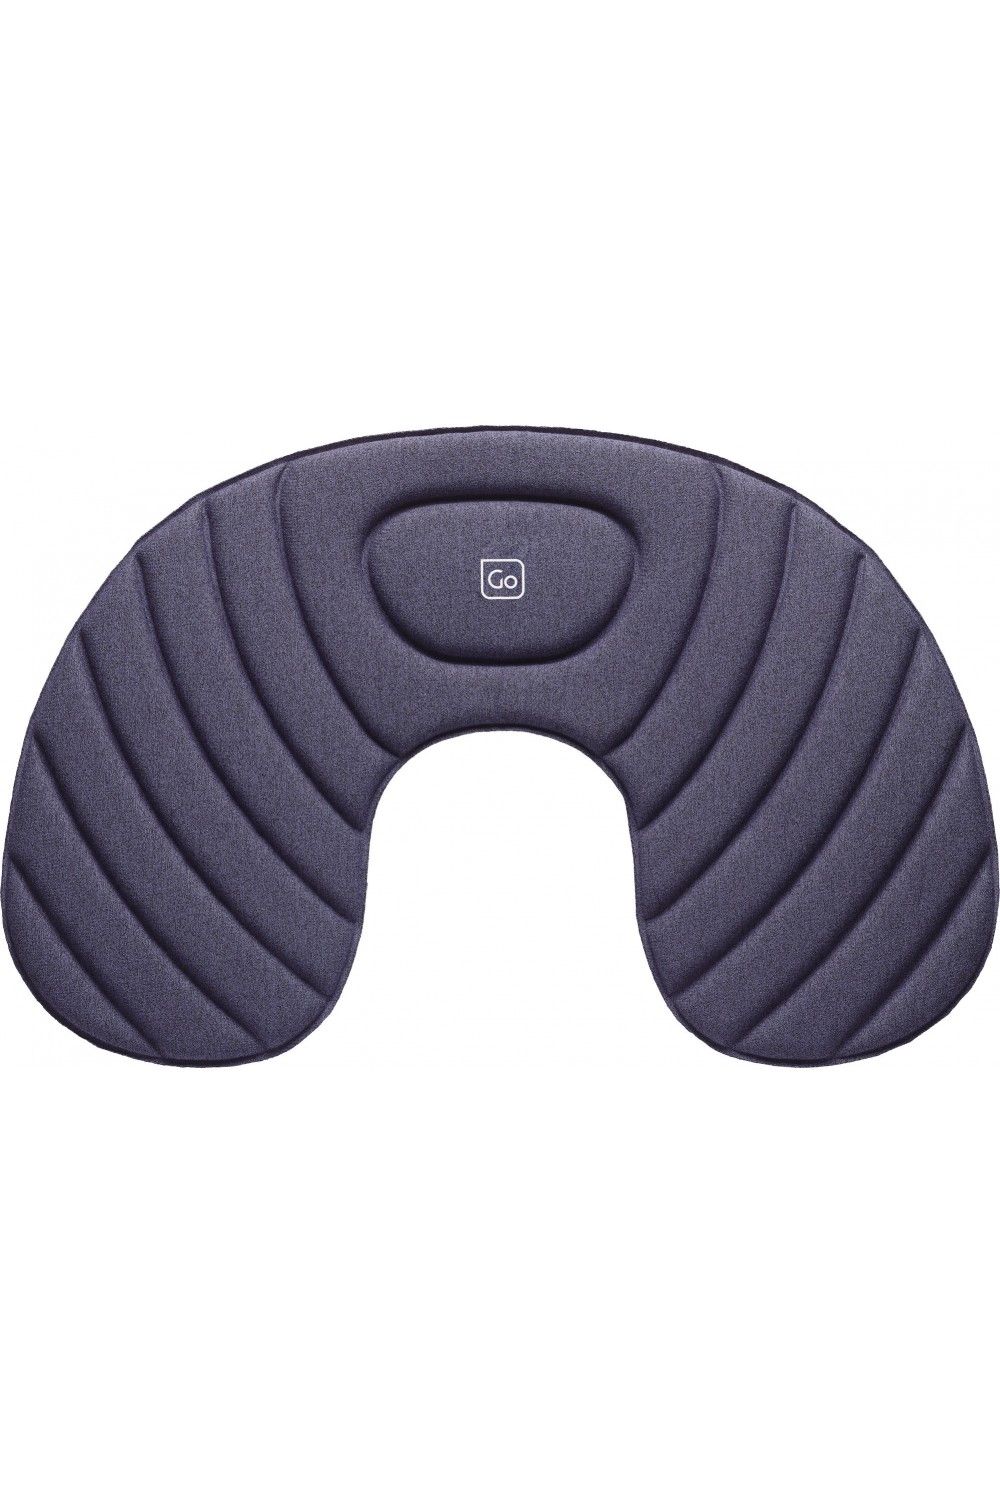 Go Travel Fusion neck pillow can be stowed away